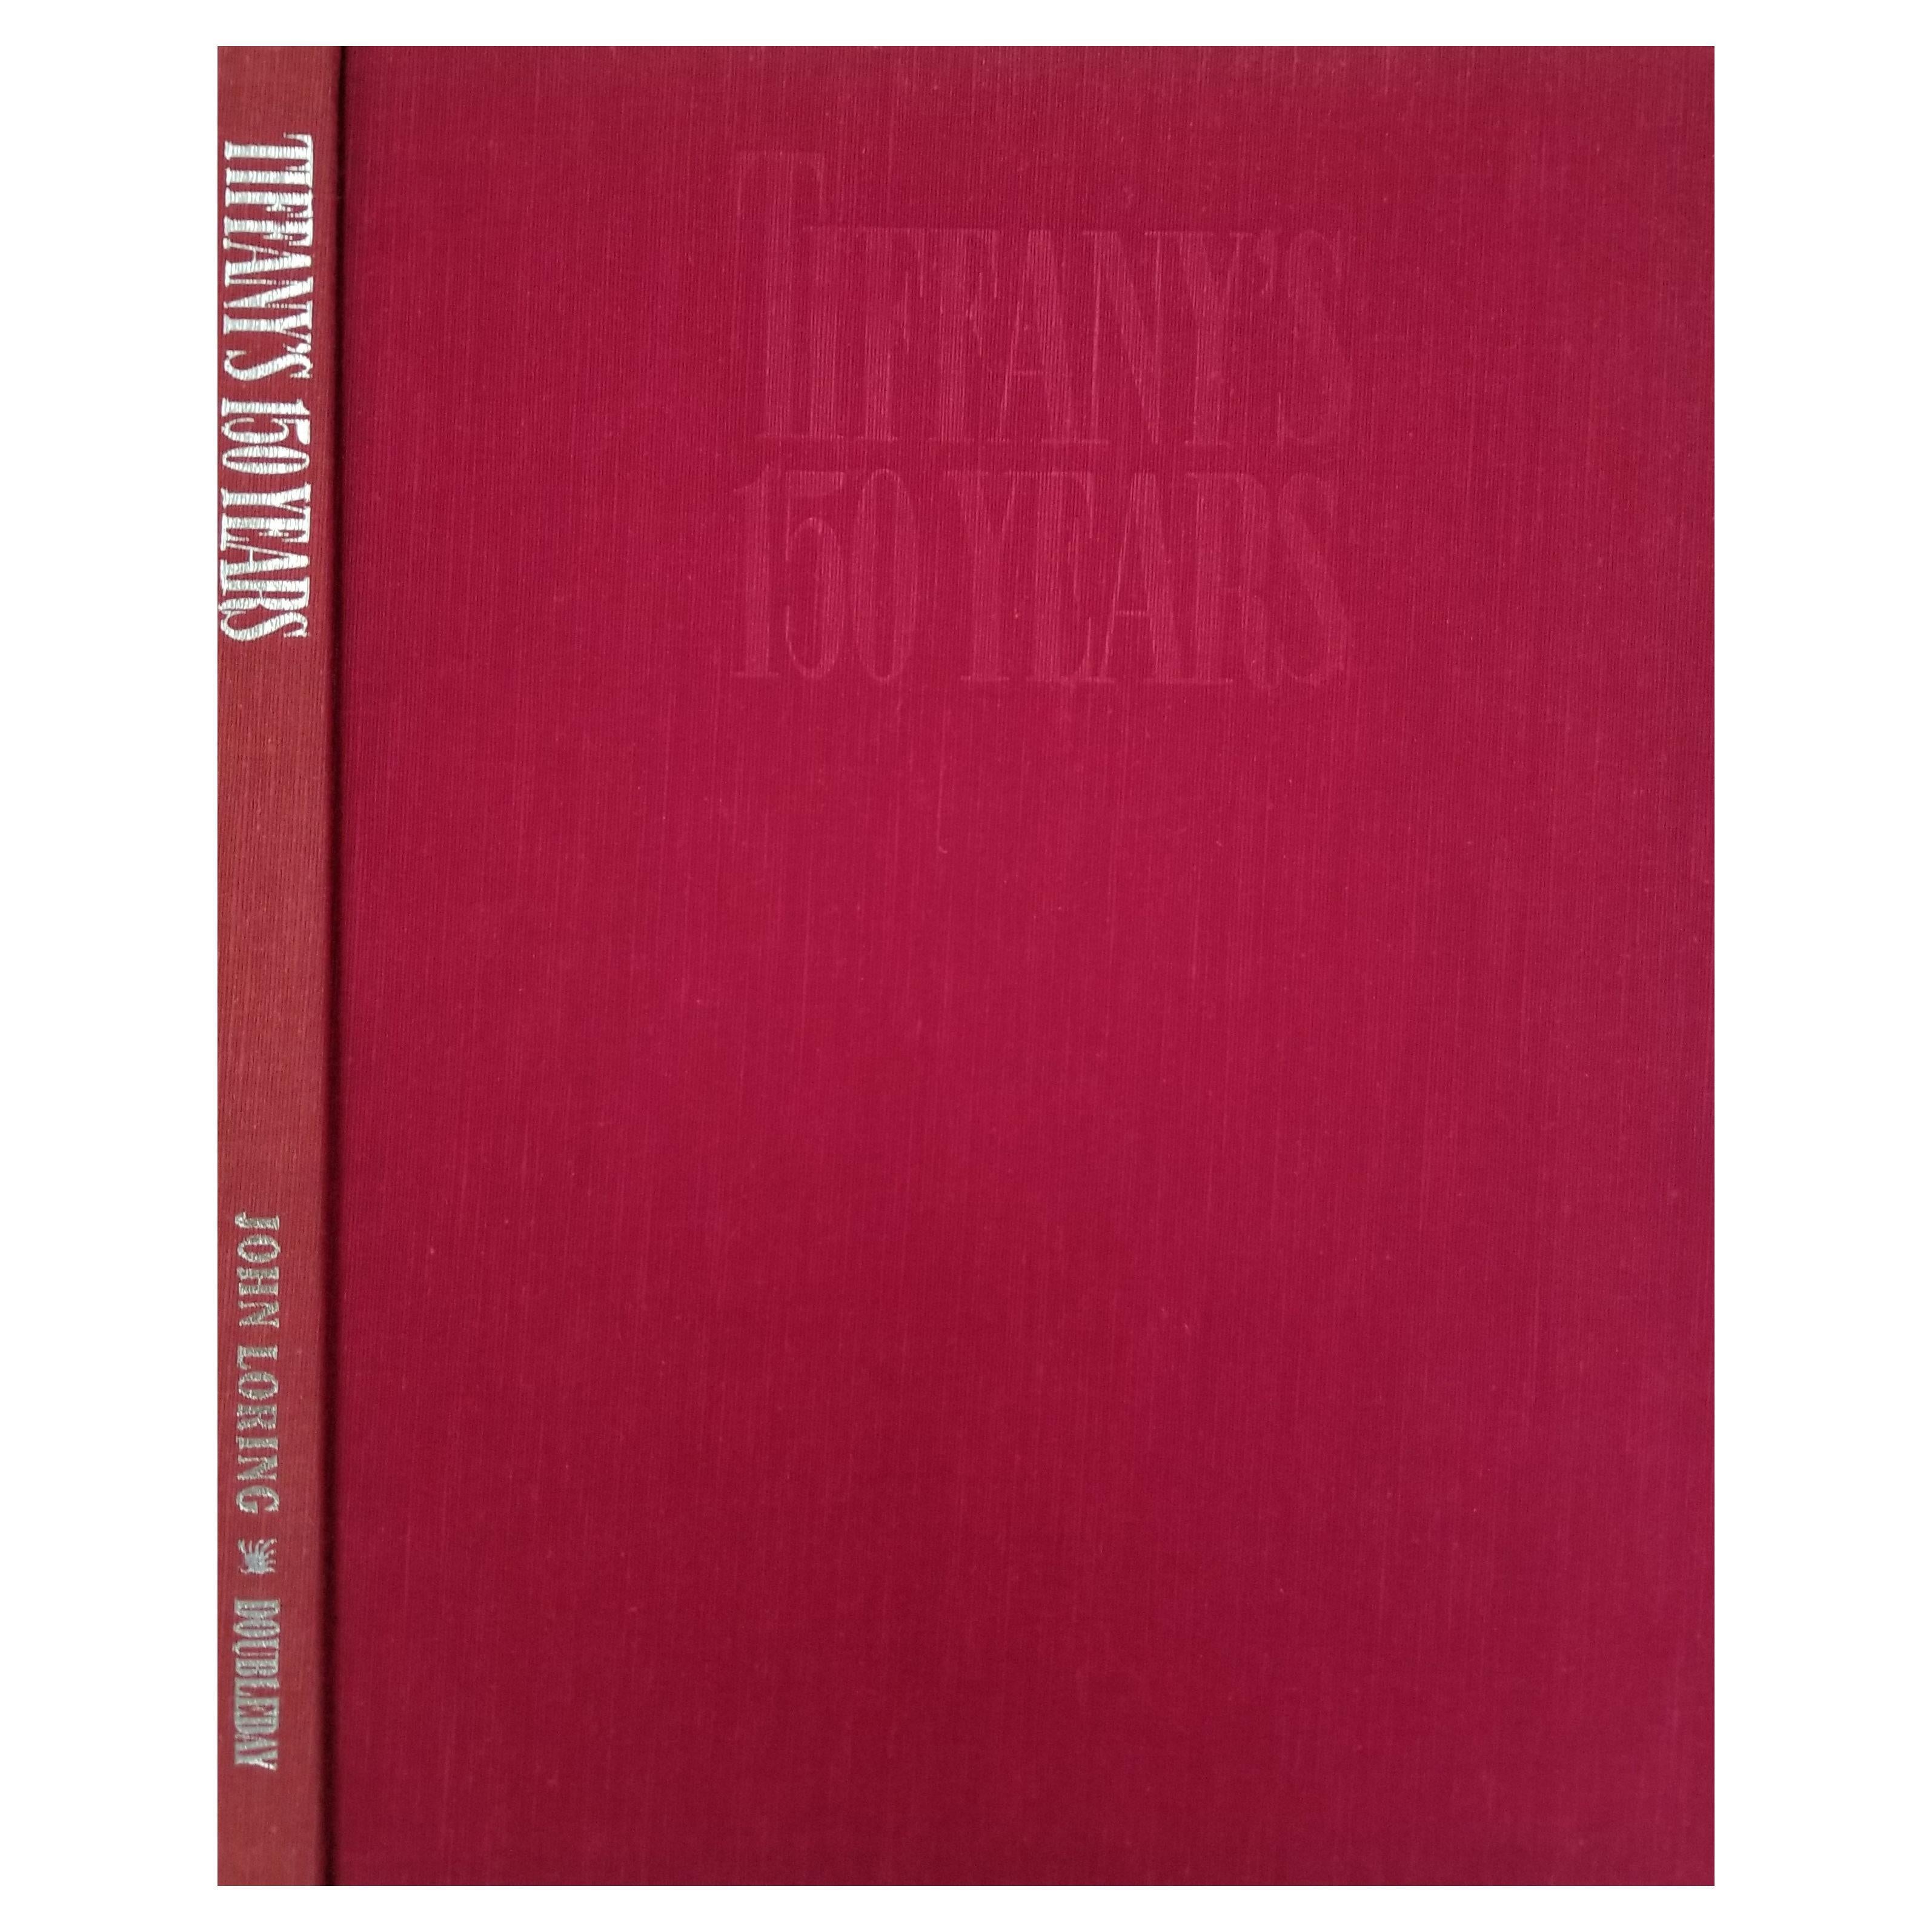 Tiffany's 150 Years by John Loring, First Edition, 1987